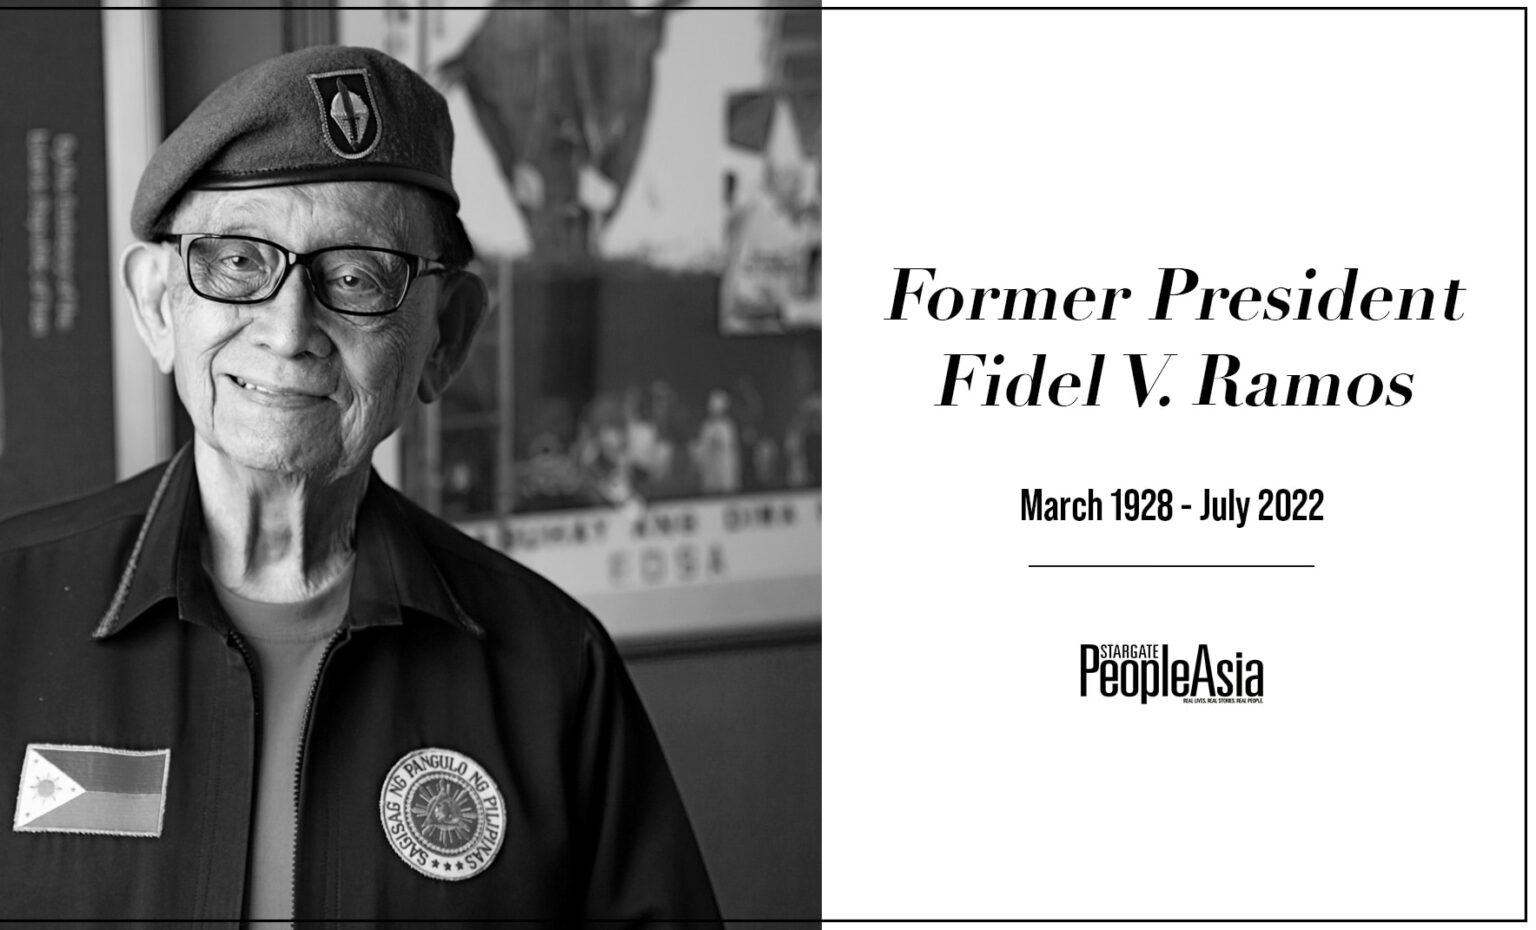 Fidel V. Ramos, 94: “I lived and have lived a good and healthy life ...